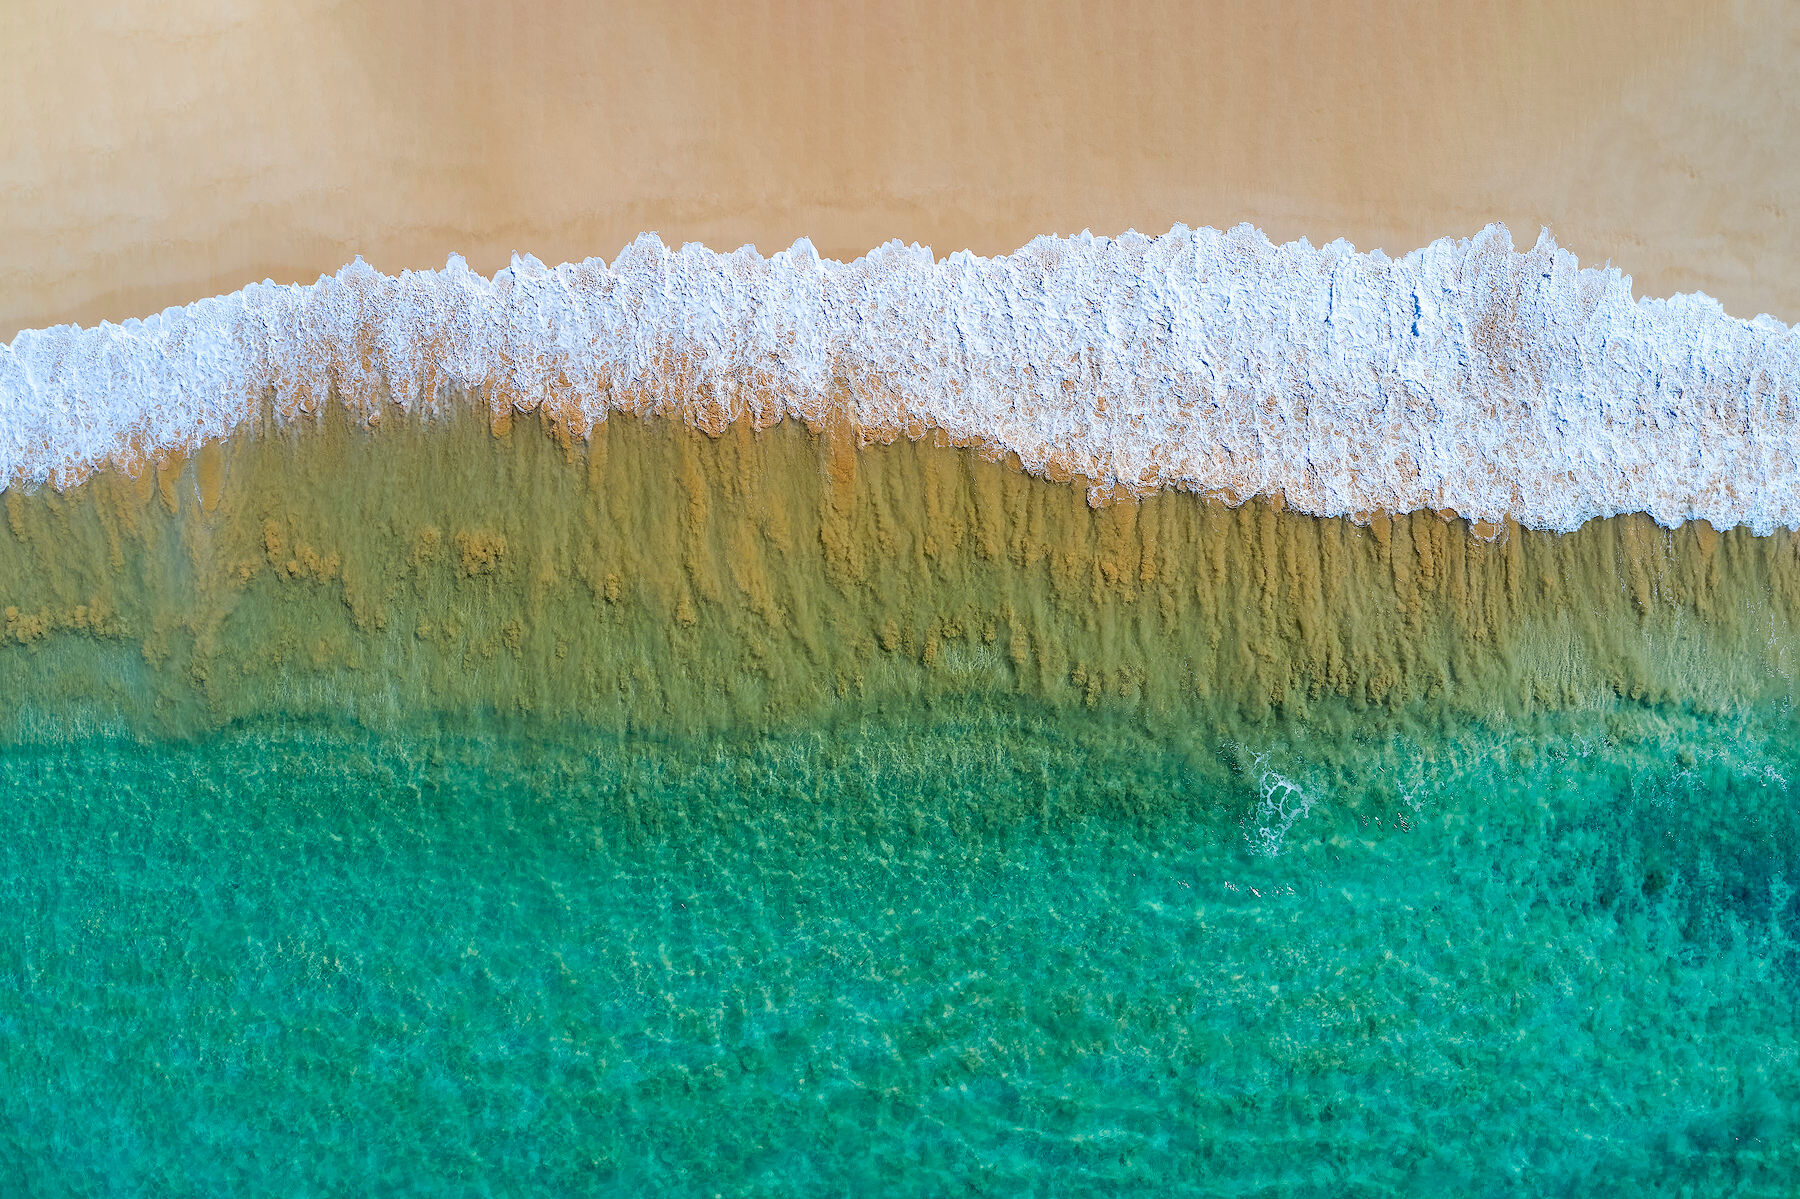 Big beach shorebreak aerial view with golden sand and beautiful Maui water.  Photographed by Andrew Shoemaker